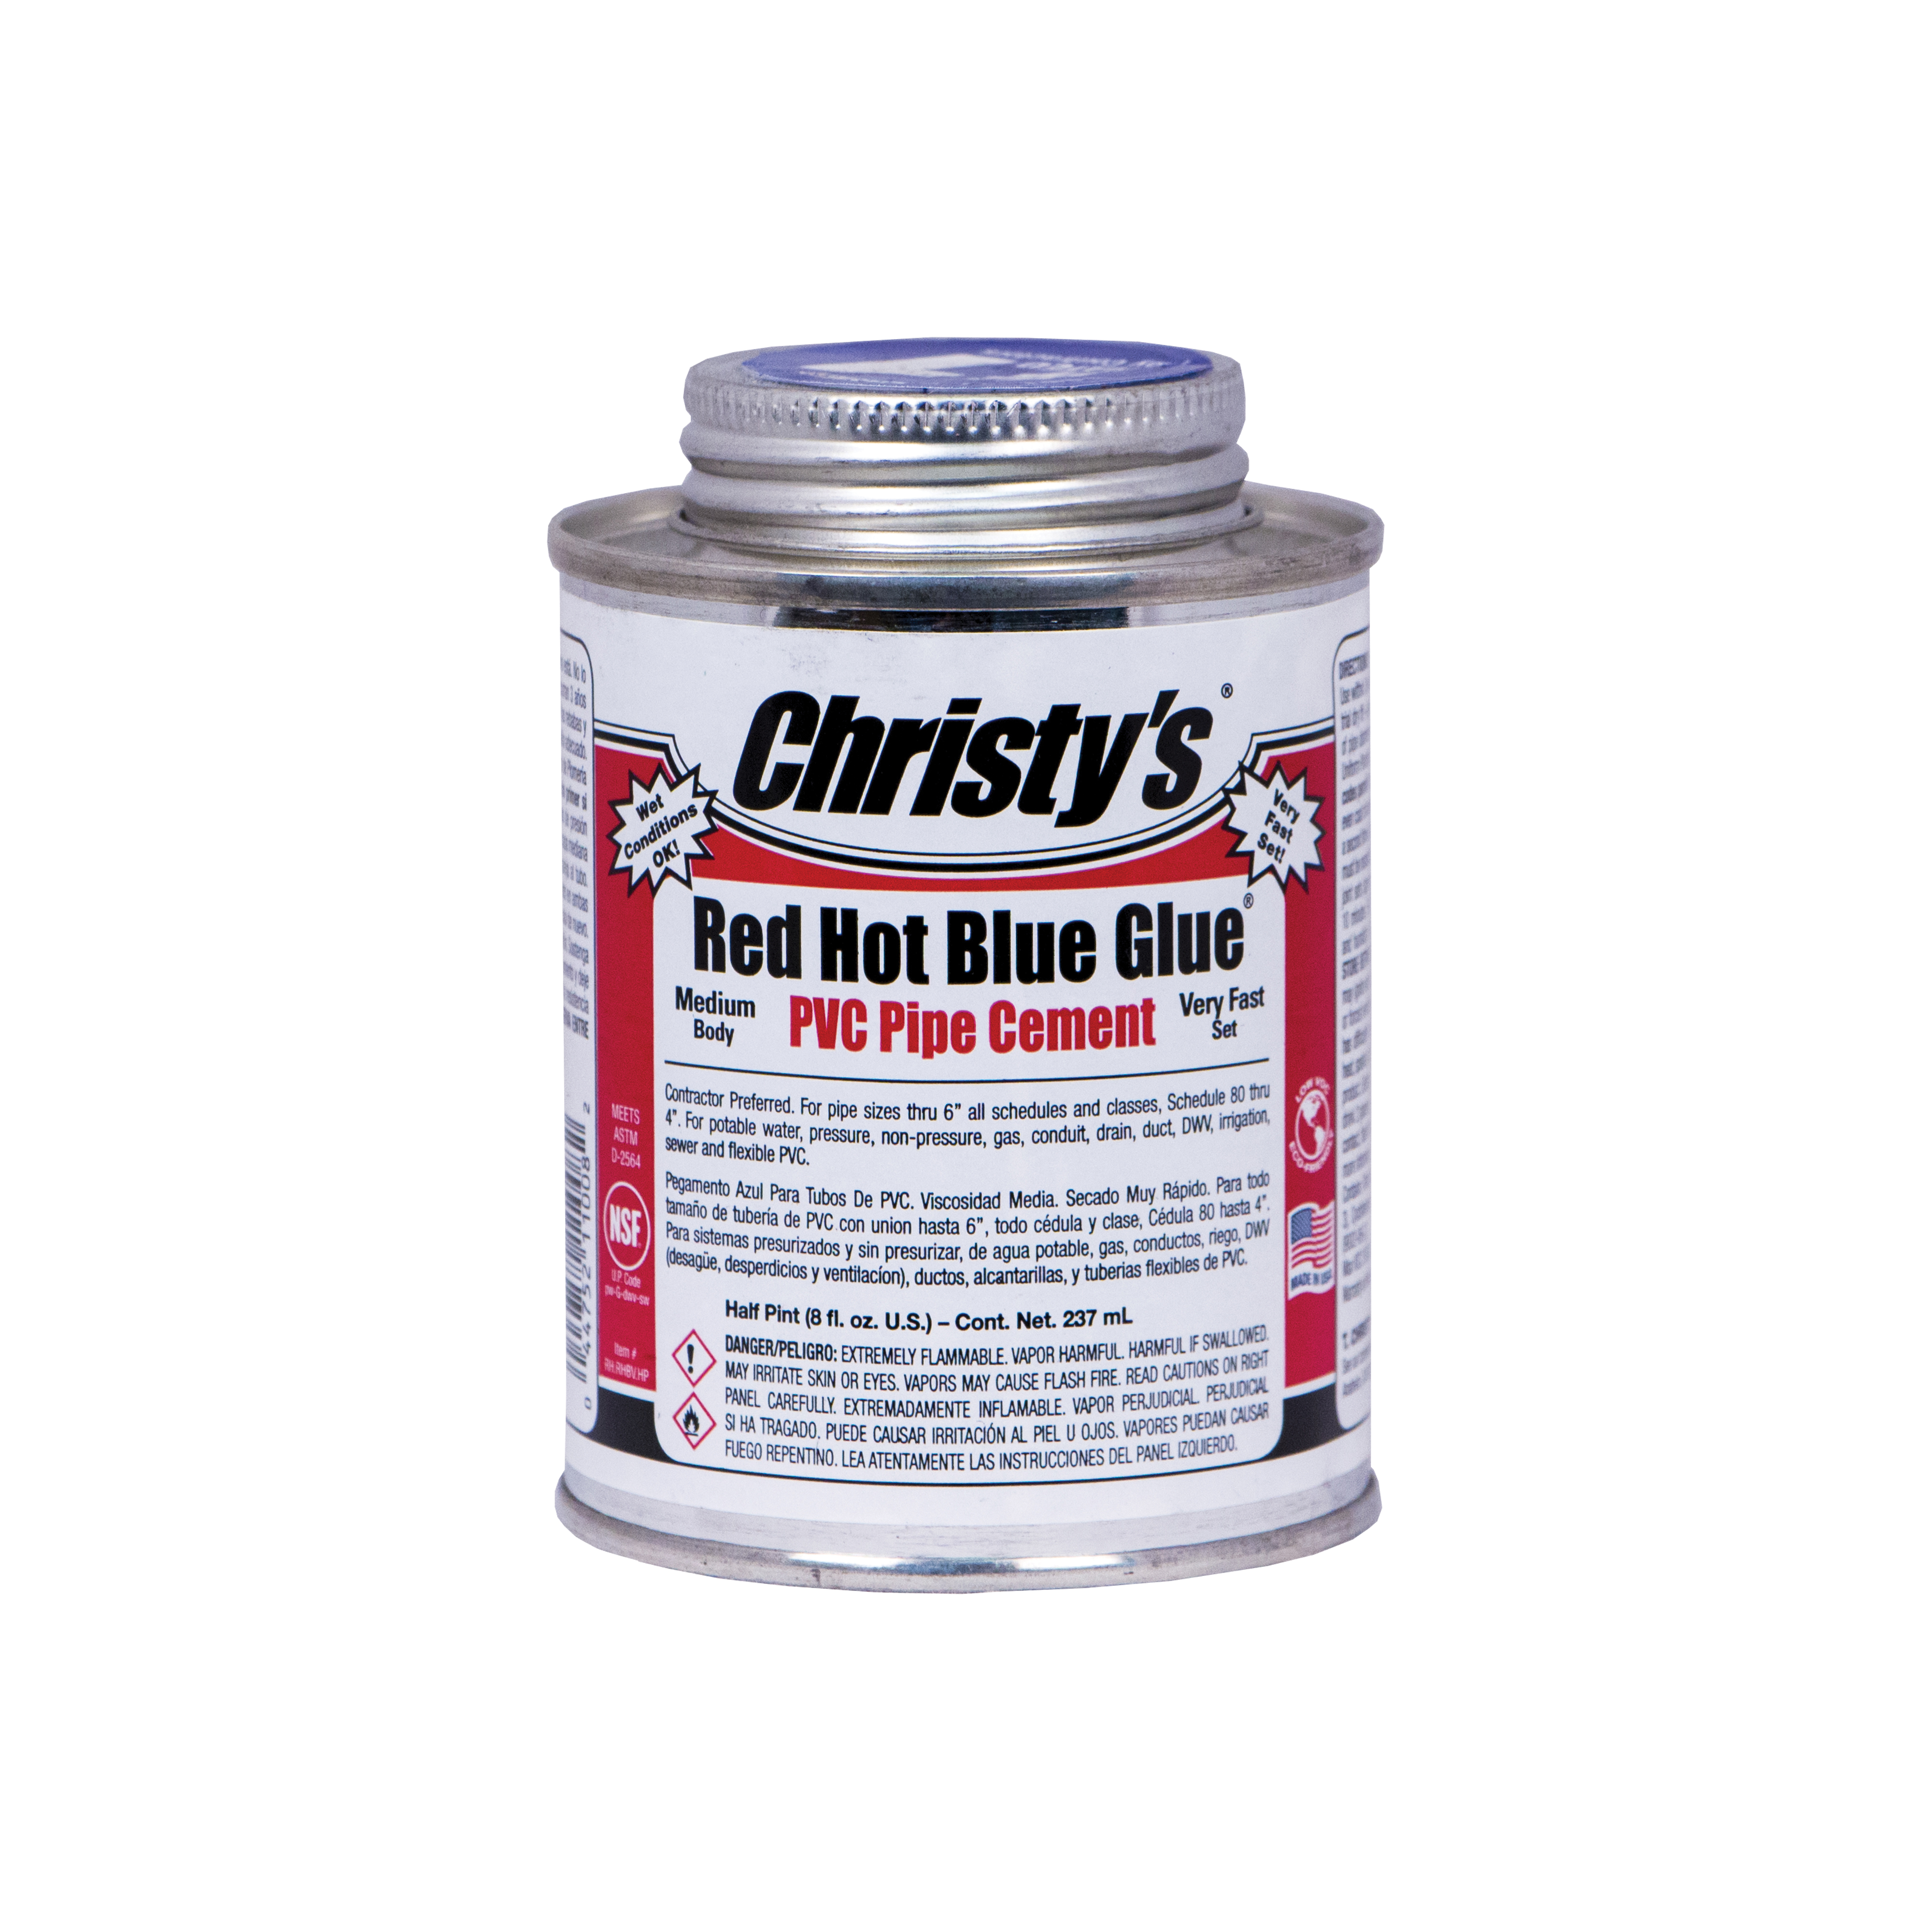 Christy's® Red Hot Blue Glue® 4585 Very Fast Set PVC Plastic Pipe Cement, 0.5 pt Can, Medium Syrupy Liquid, Deep Blue, 0.955 +/- 0.01